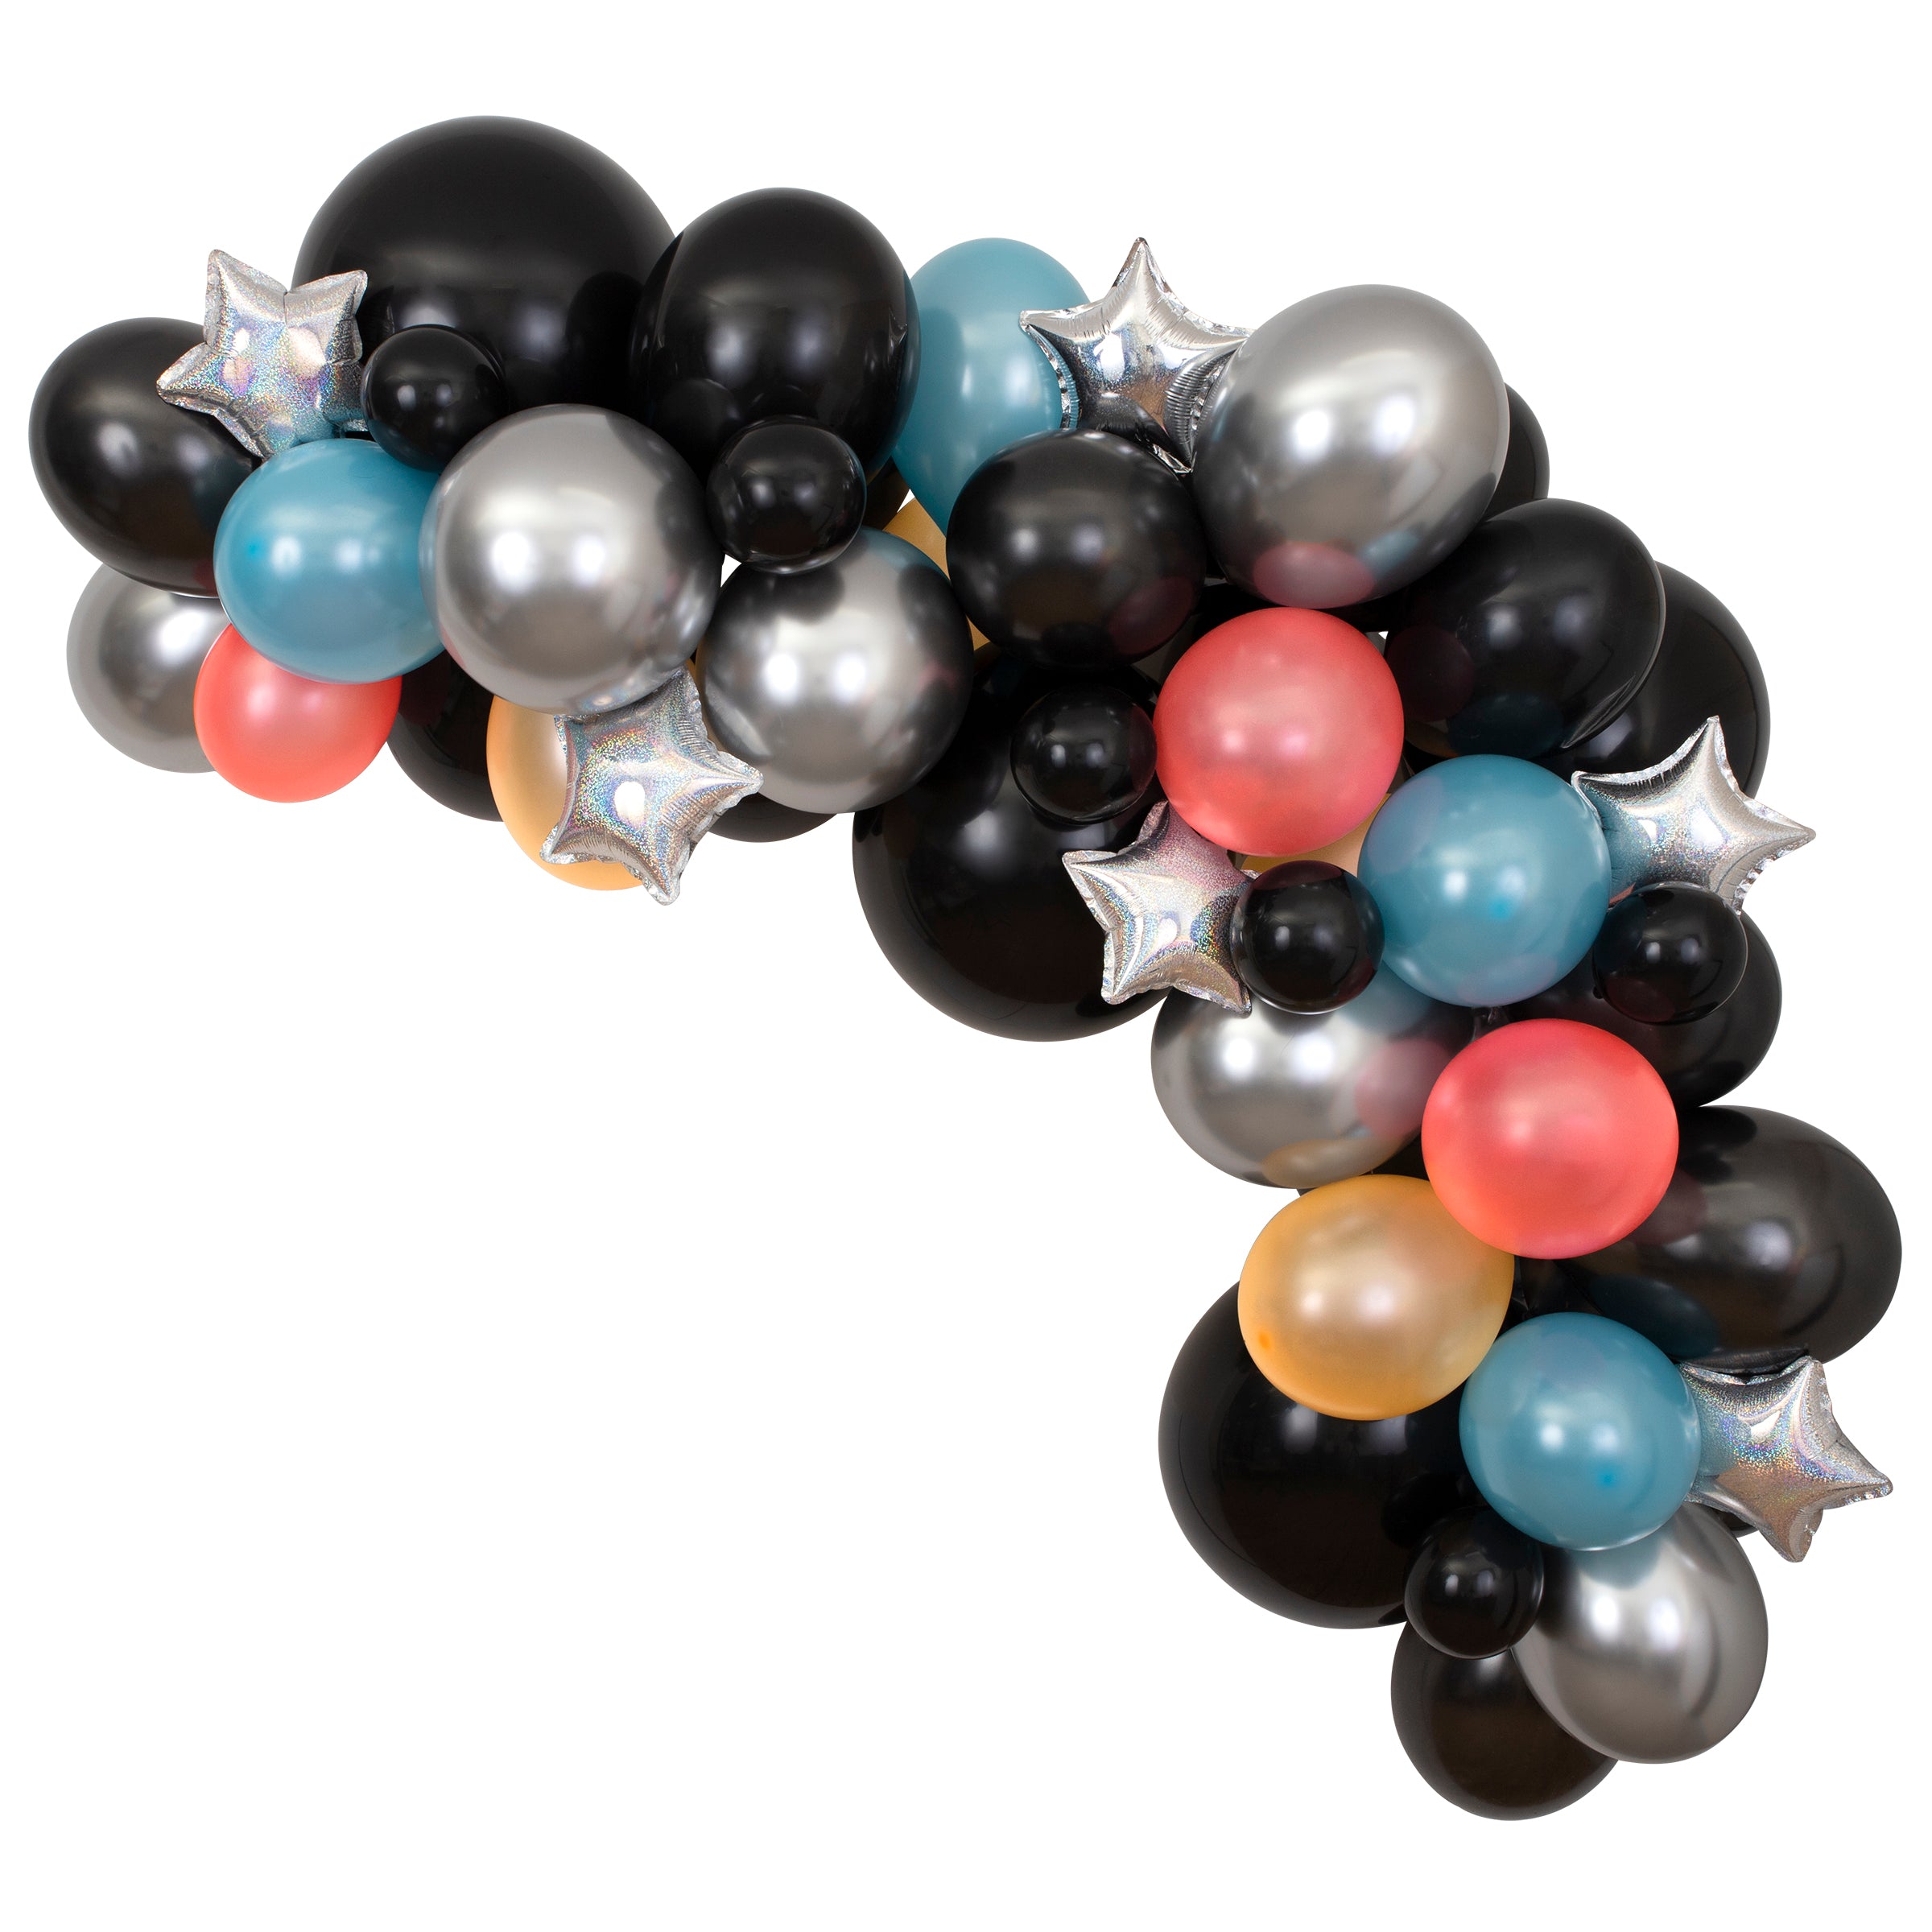 Our balloon kit is an easy way to create a colourful balloon garland, with black balloons, star balloons, foil balloons and metallic balloons.